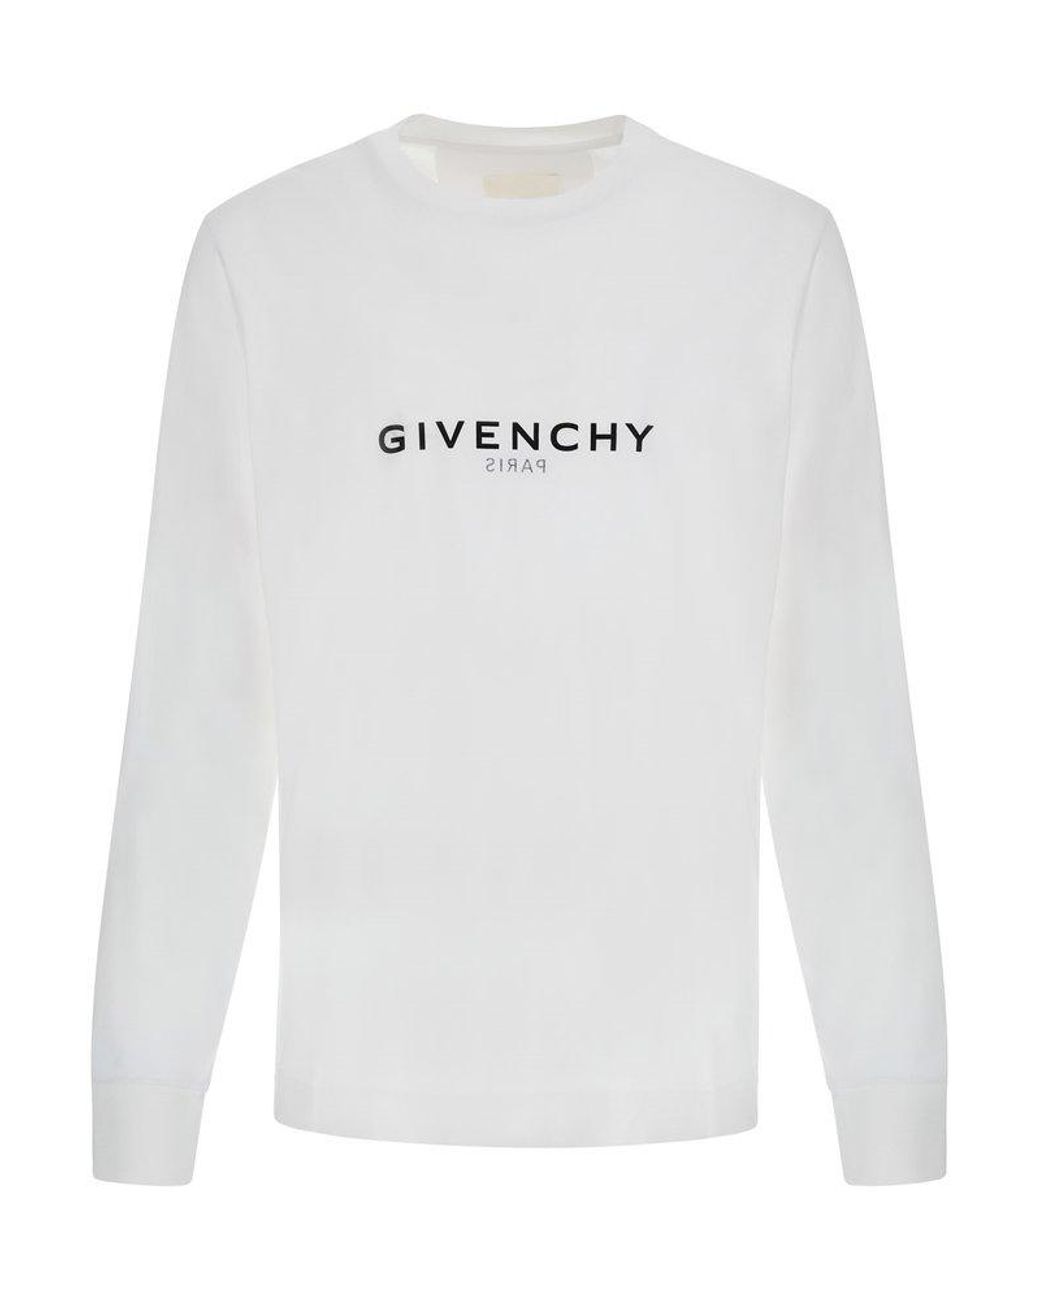 Givenchy Logo Printed Long-sleeved T-shirt in White for Men | Lyst